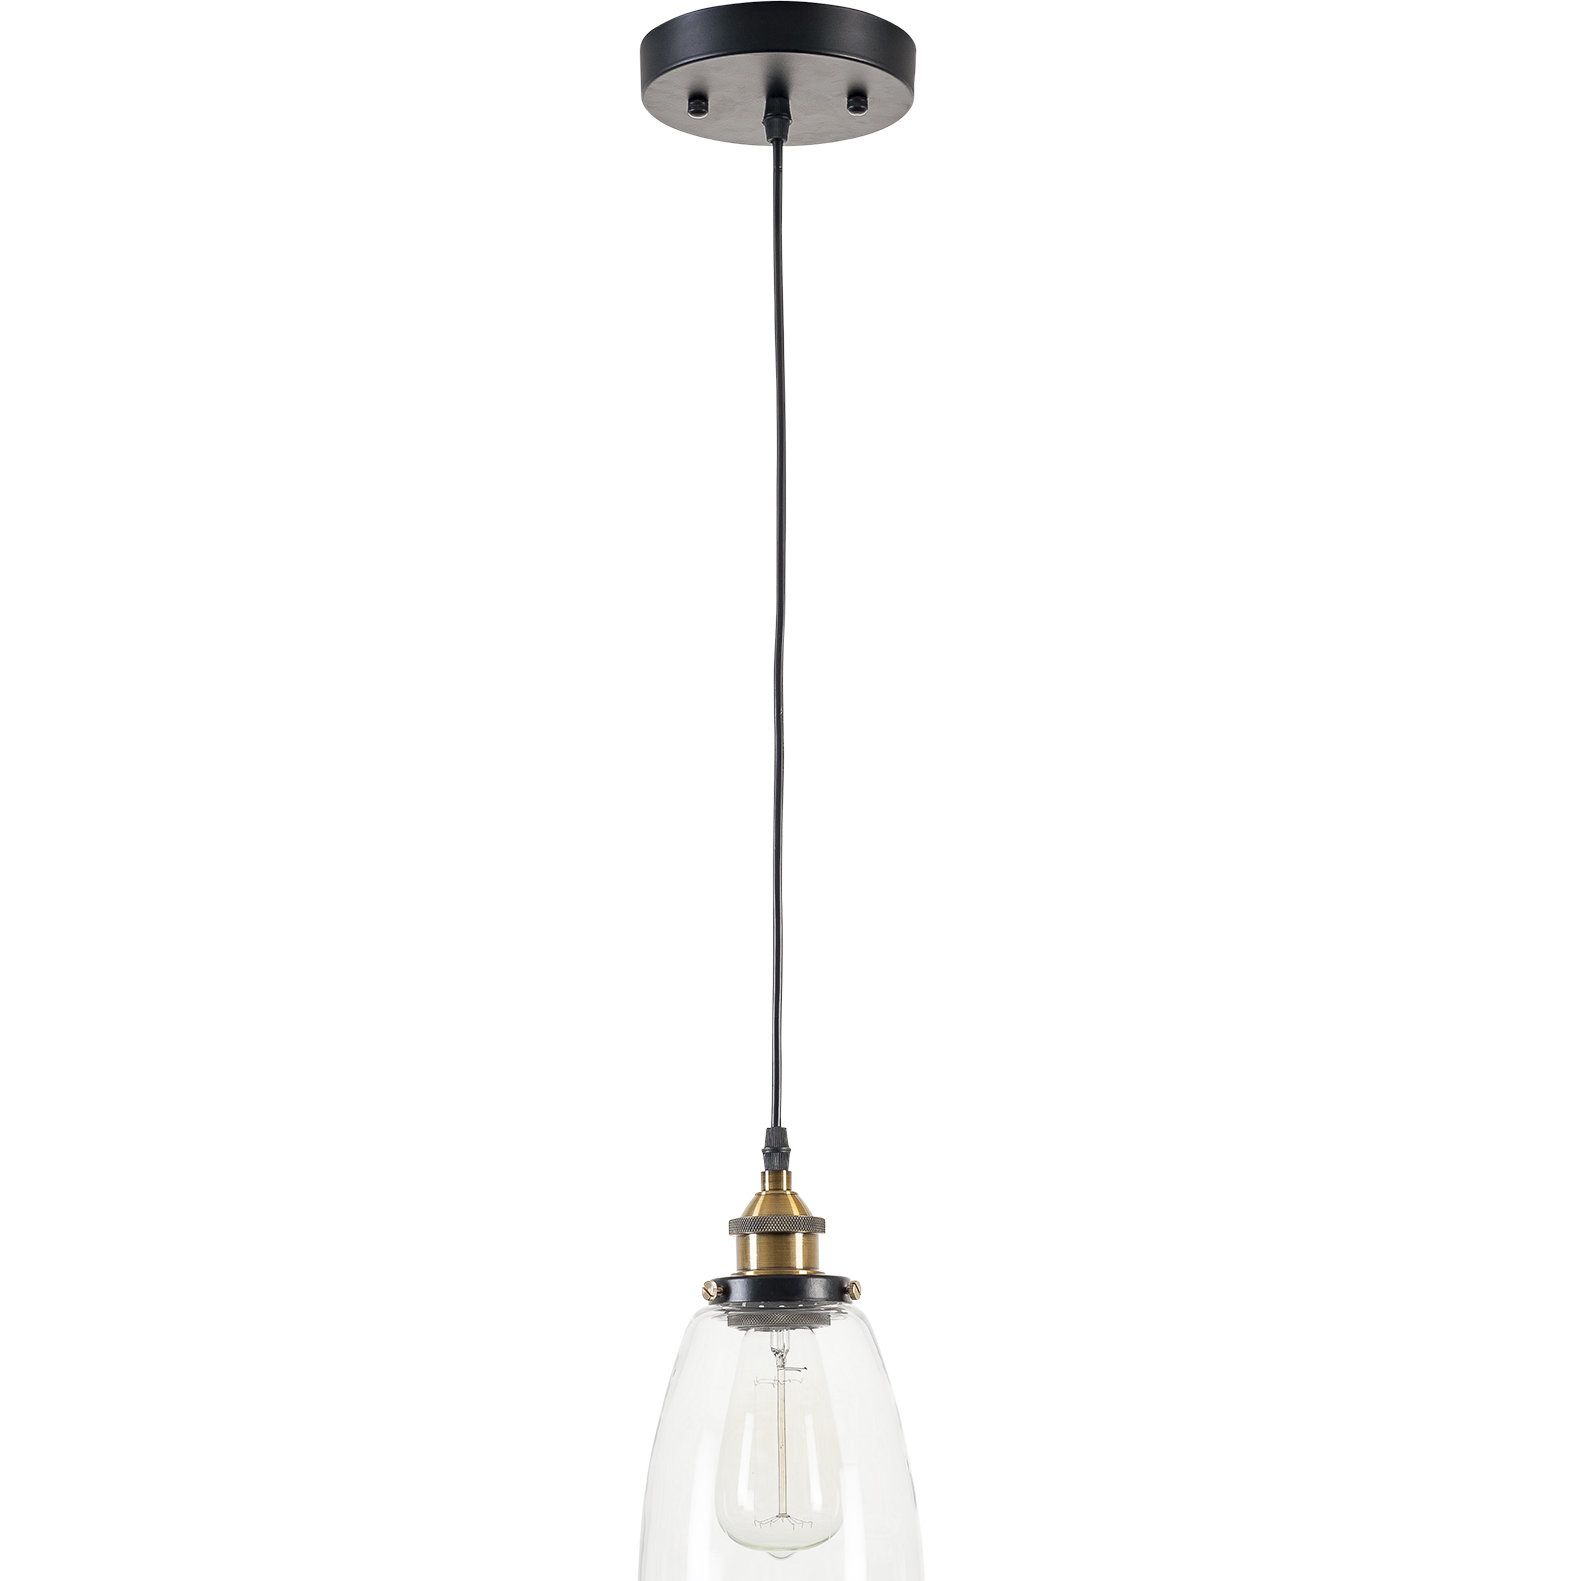 Iron Gate 1 Light Single Bell Pendant Throughout Houon 1 Light Cone Bell Pendants (View 27 of 30)